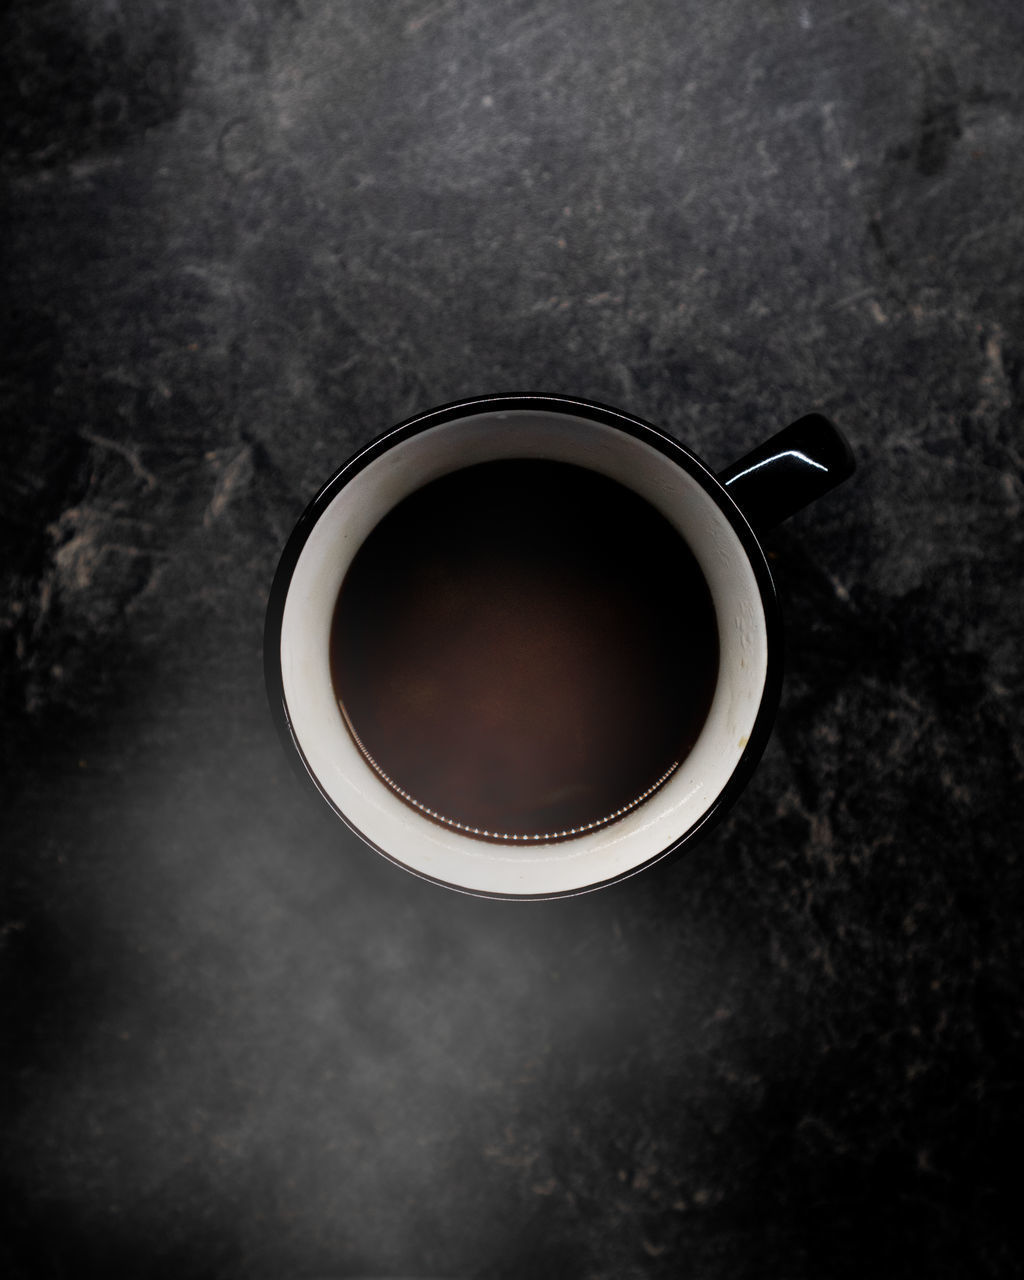 HIGH ANGLE VIEW OF COFFEE CUP WITH BLACK TEA